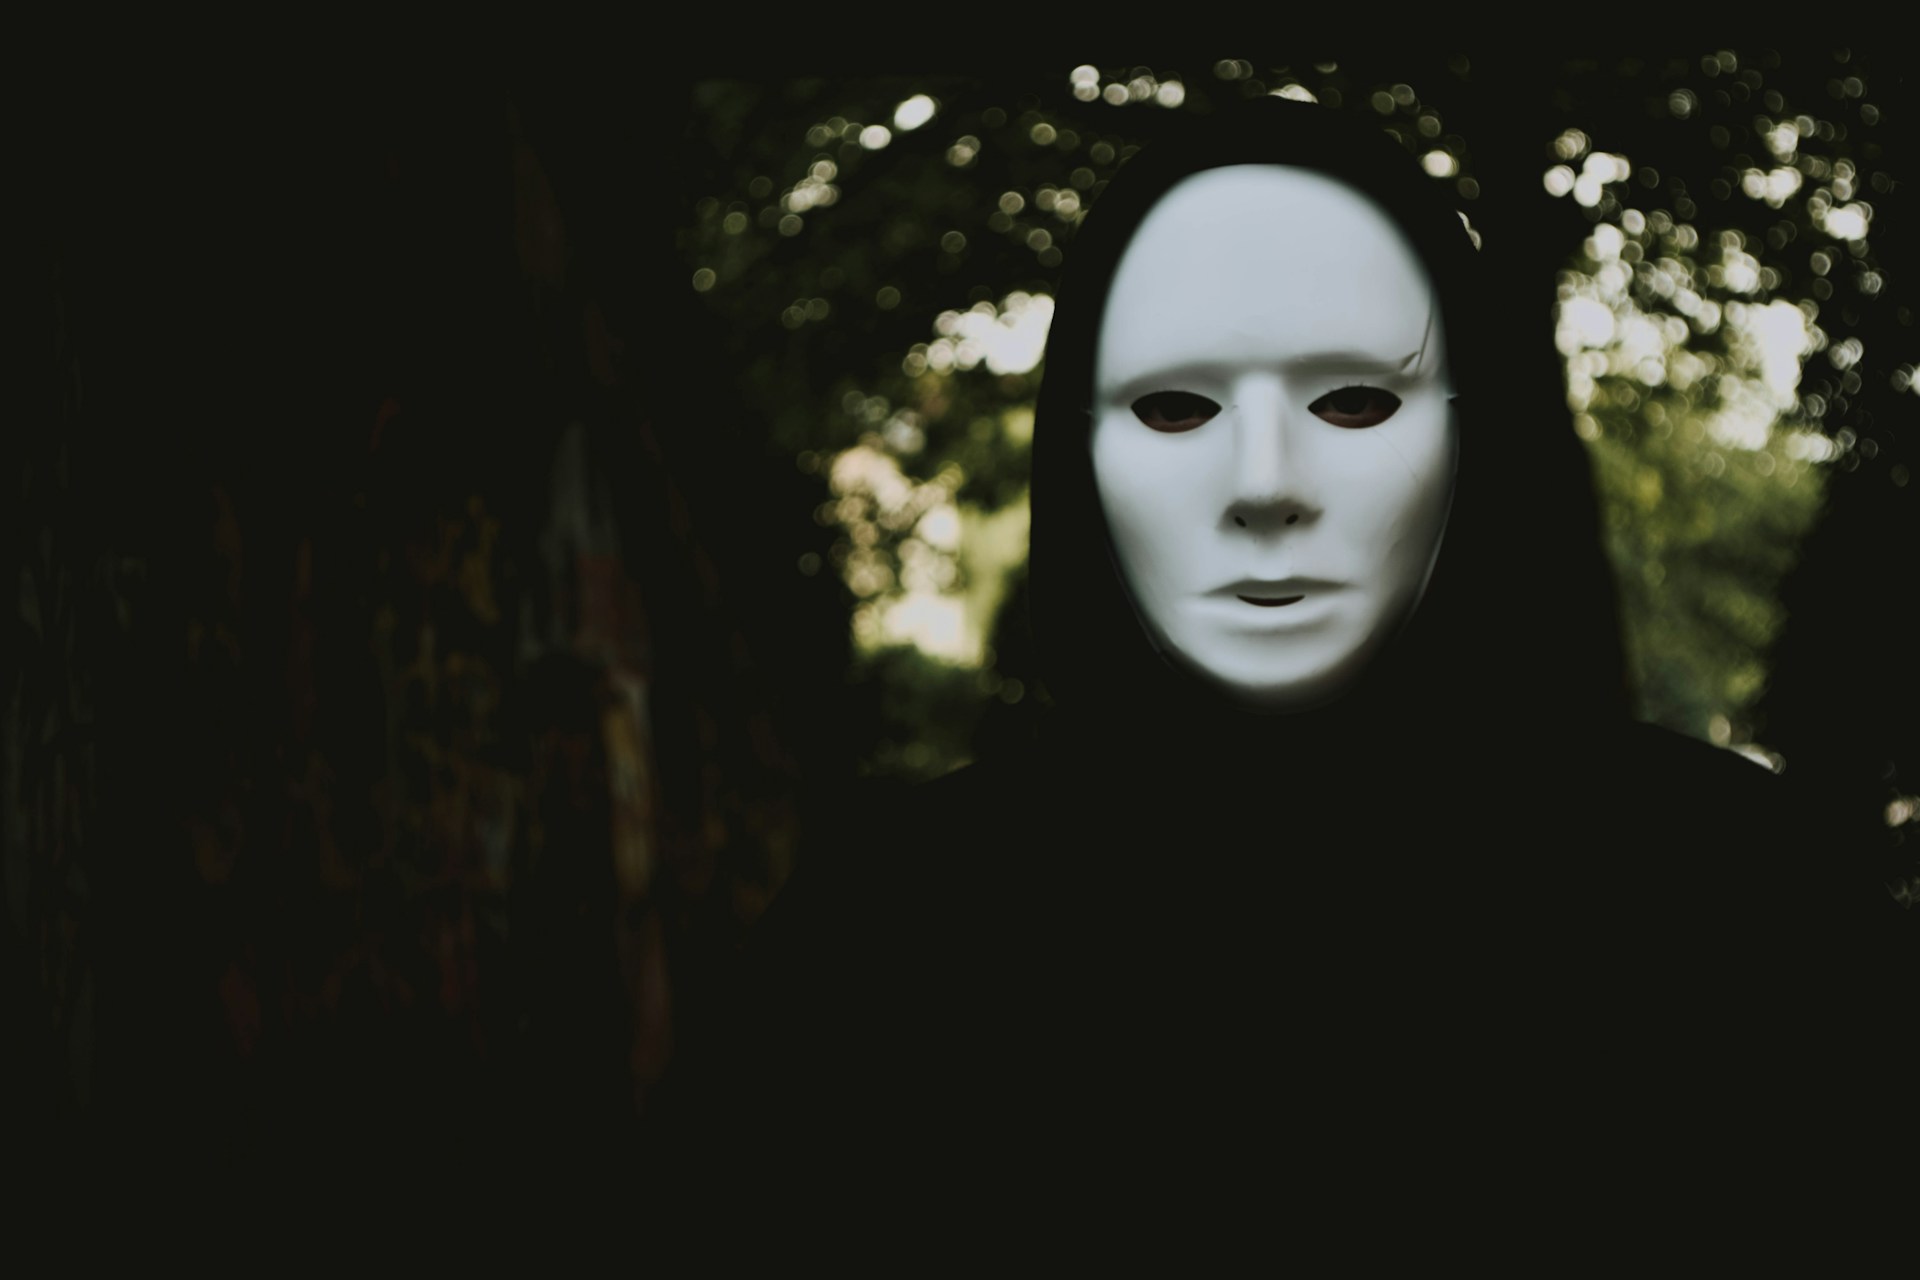 Hooded person wearing a white expressionless mask